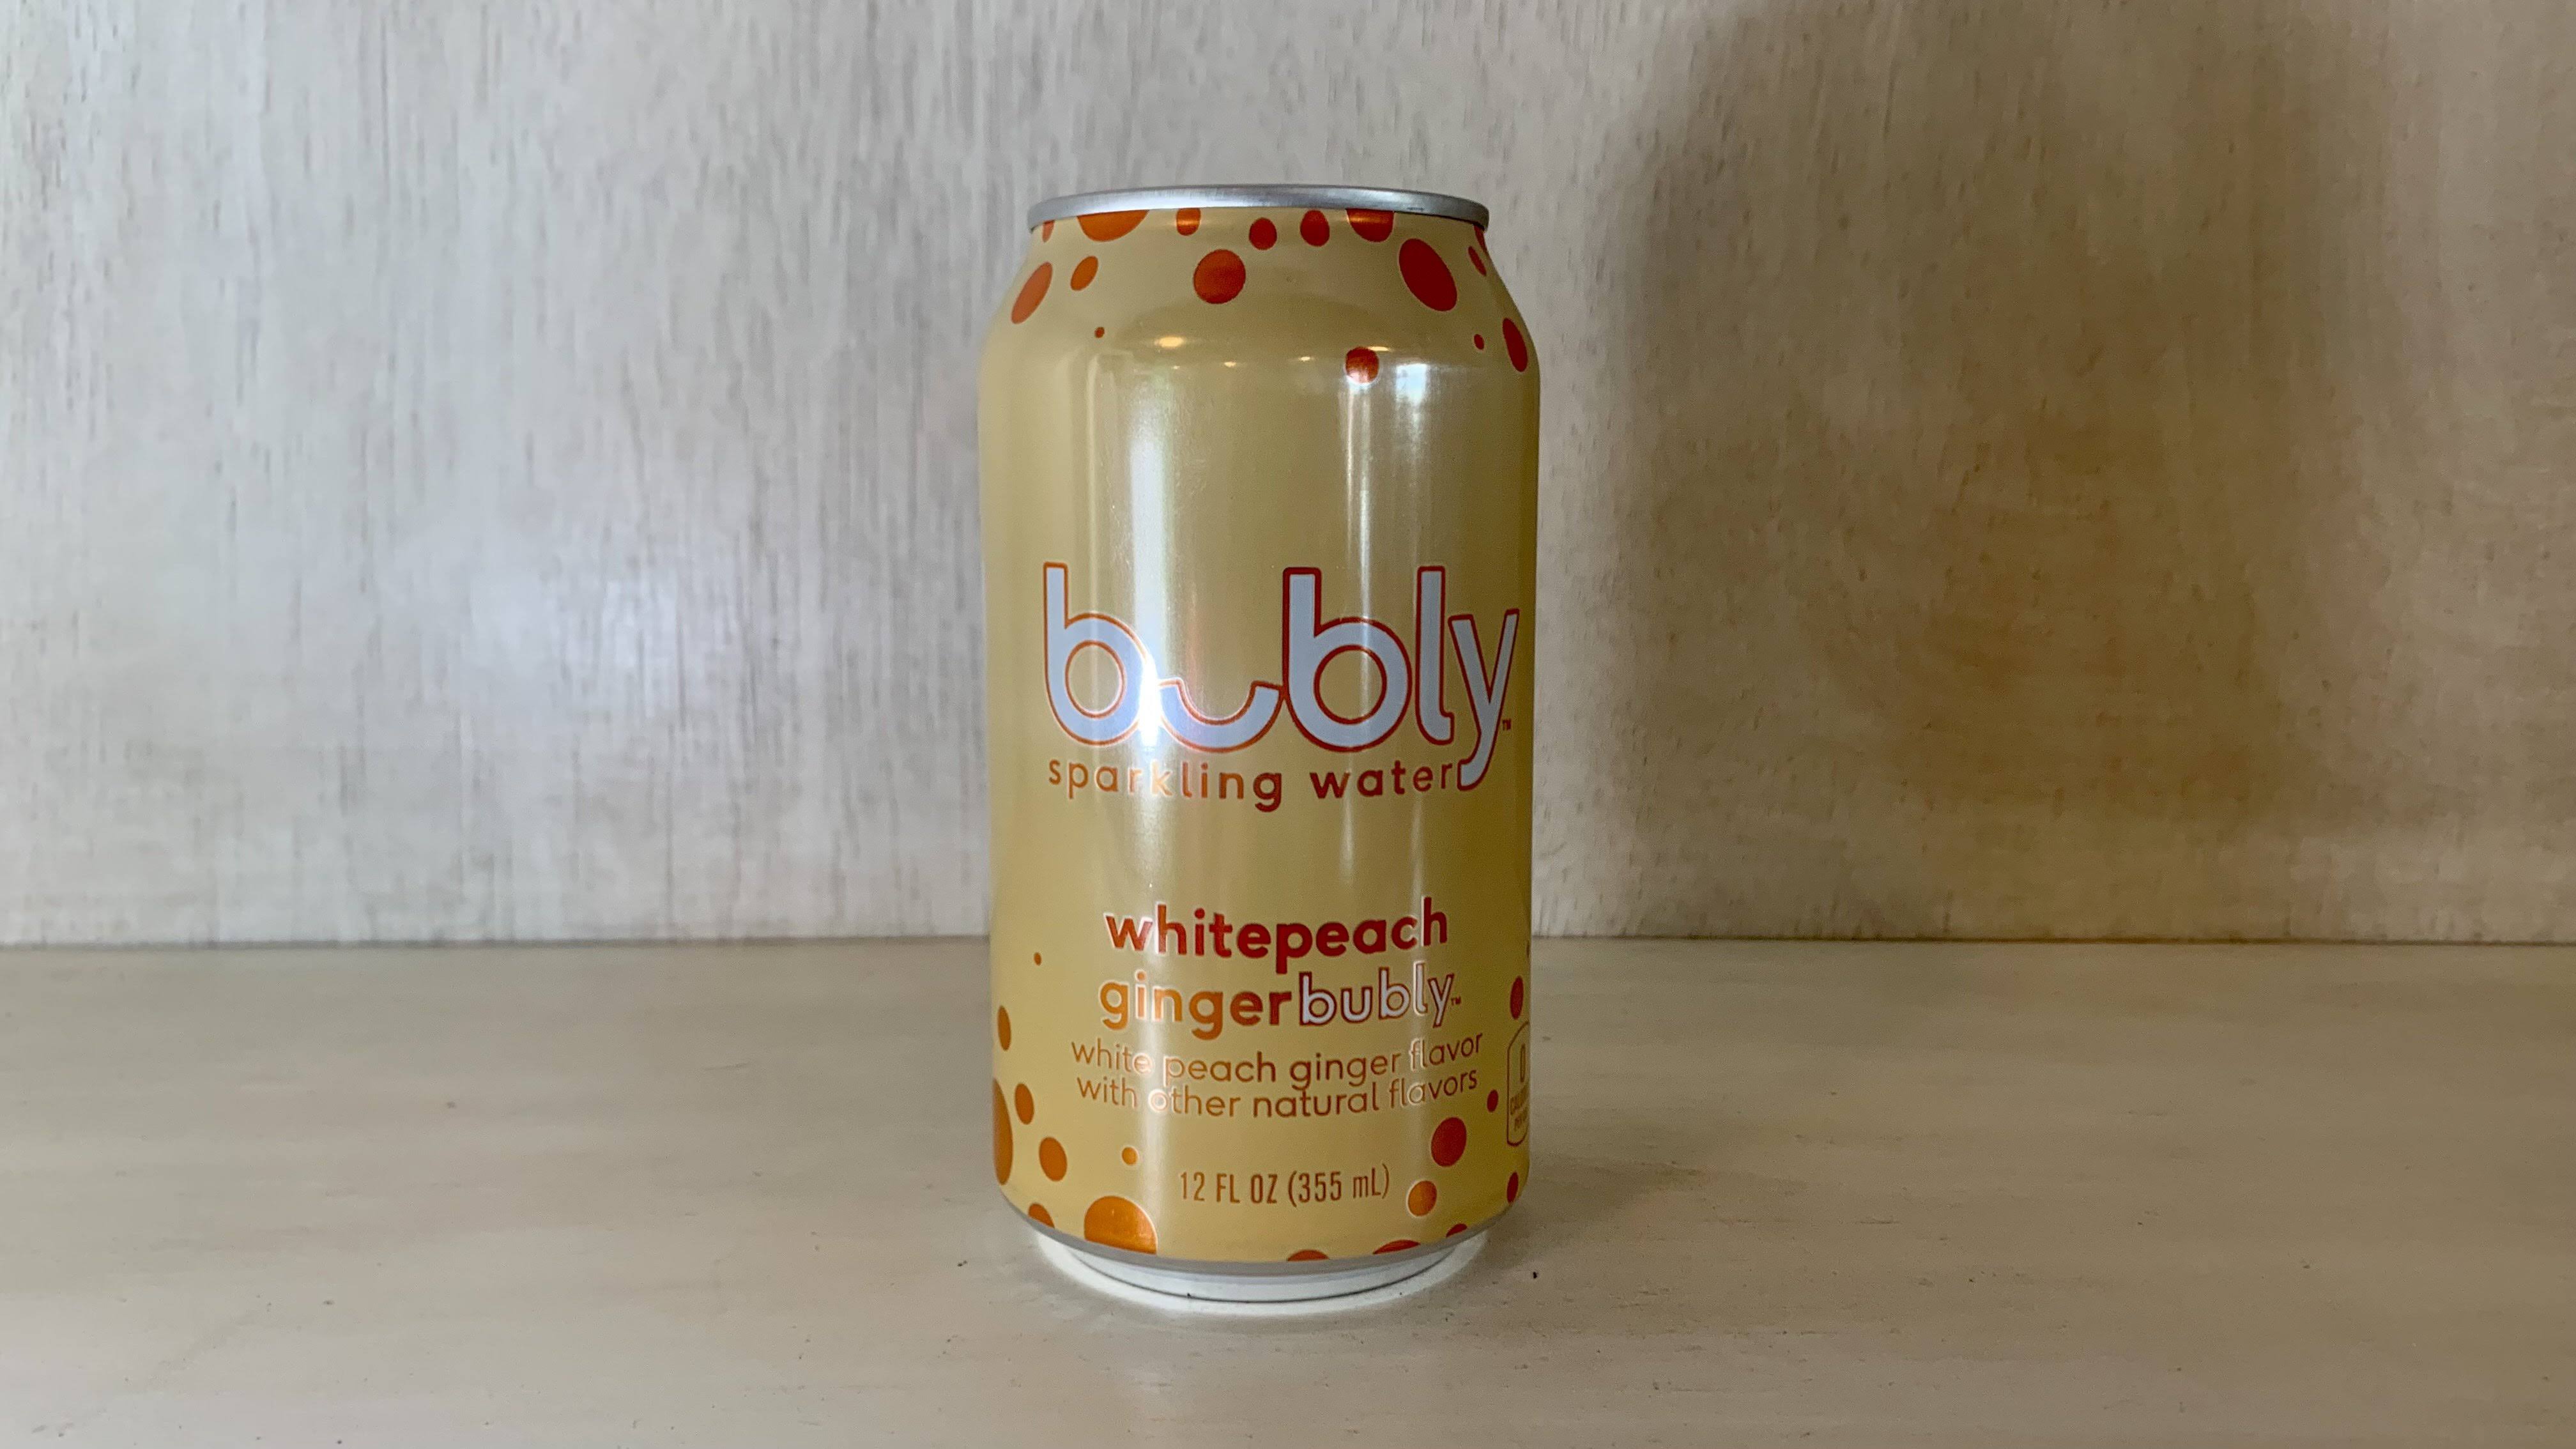 Bubly Sparkling Water, Whitepeach Ginger - 12 fl oz